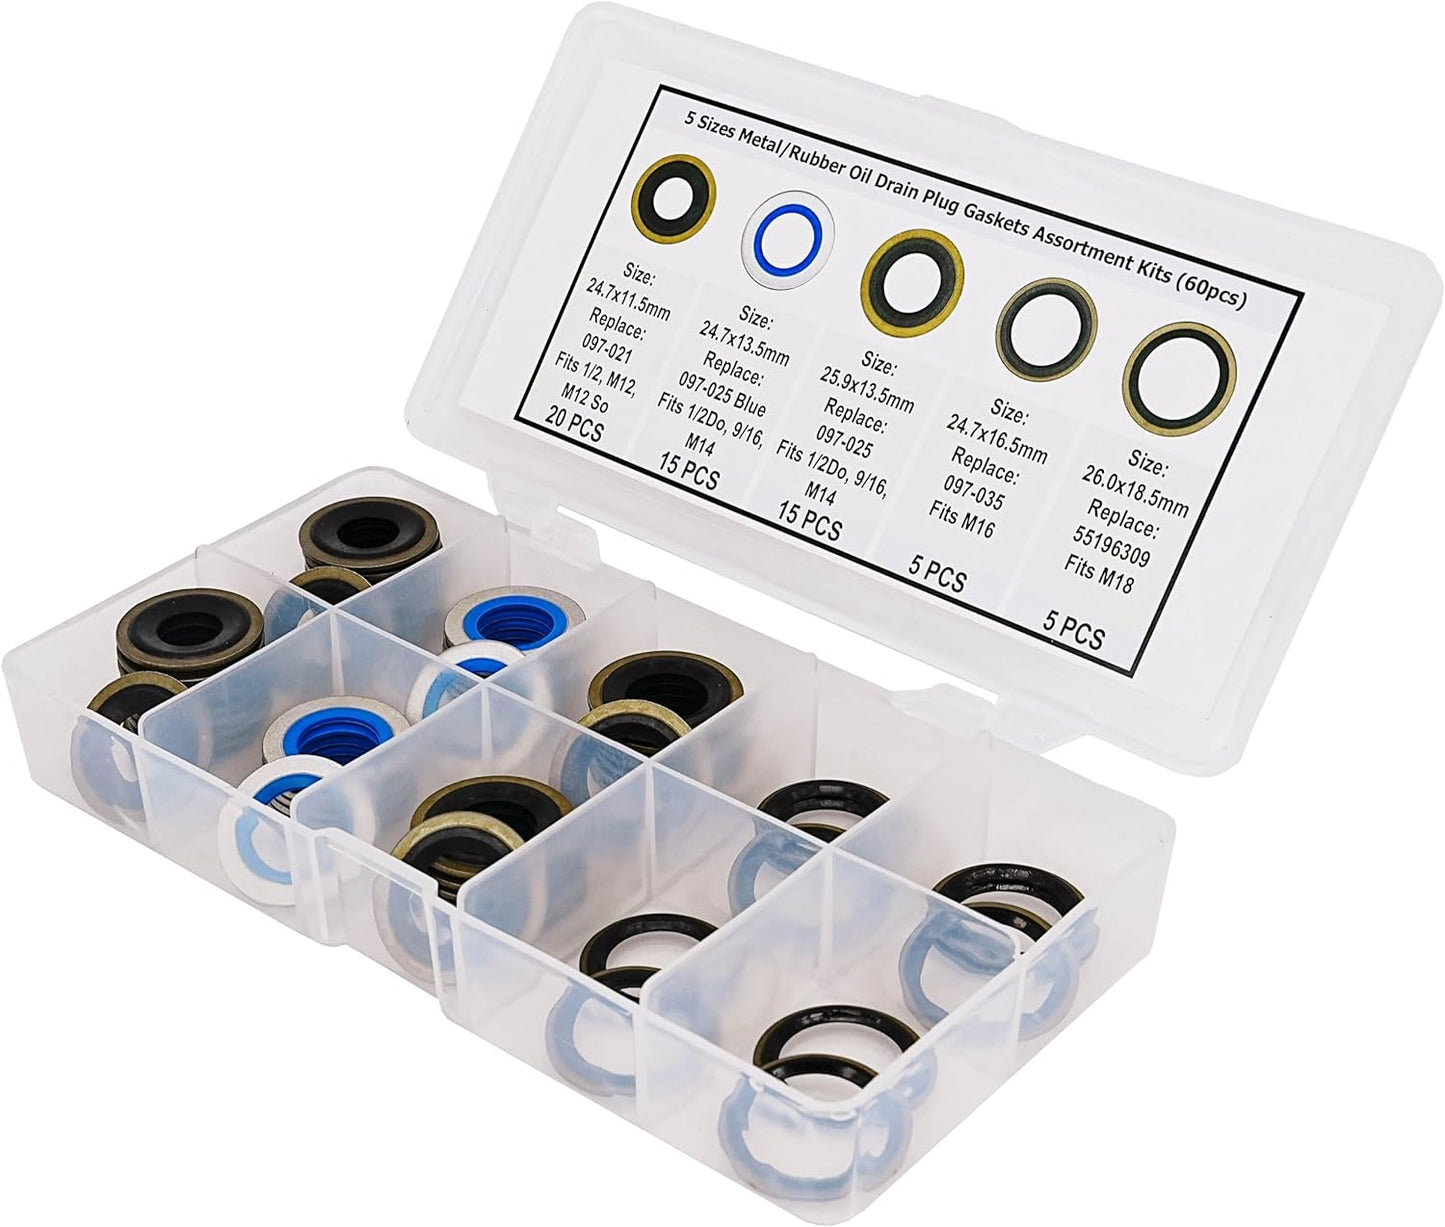 Metal/Rubber Oil Drain Plug Gasket Assortment Kits fit for Ford and Chevrolet Replace 097-021 097-025 097-035 55196309